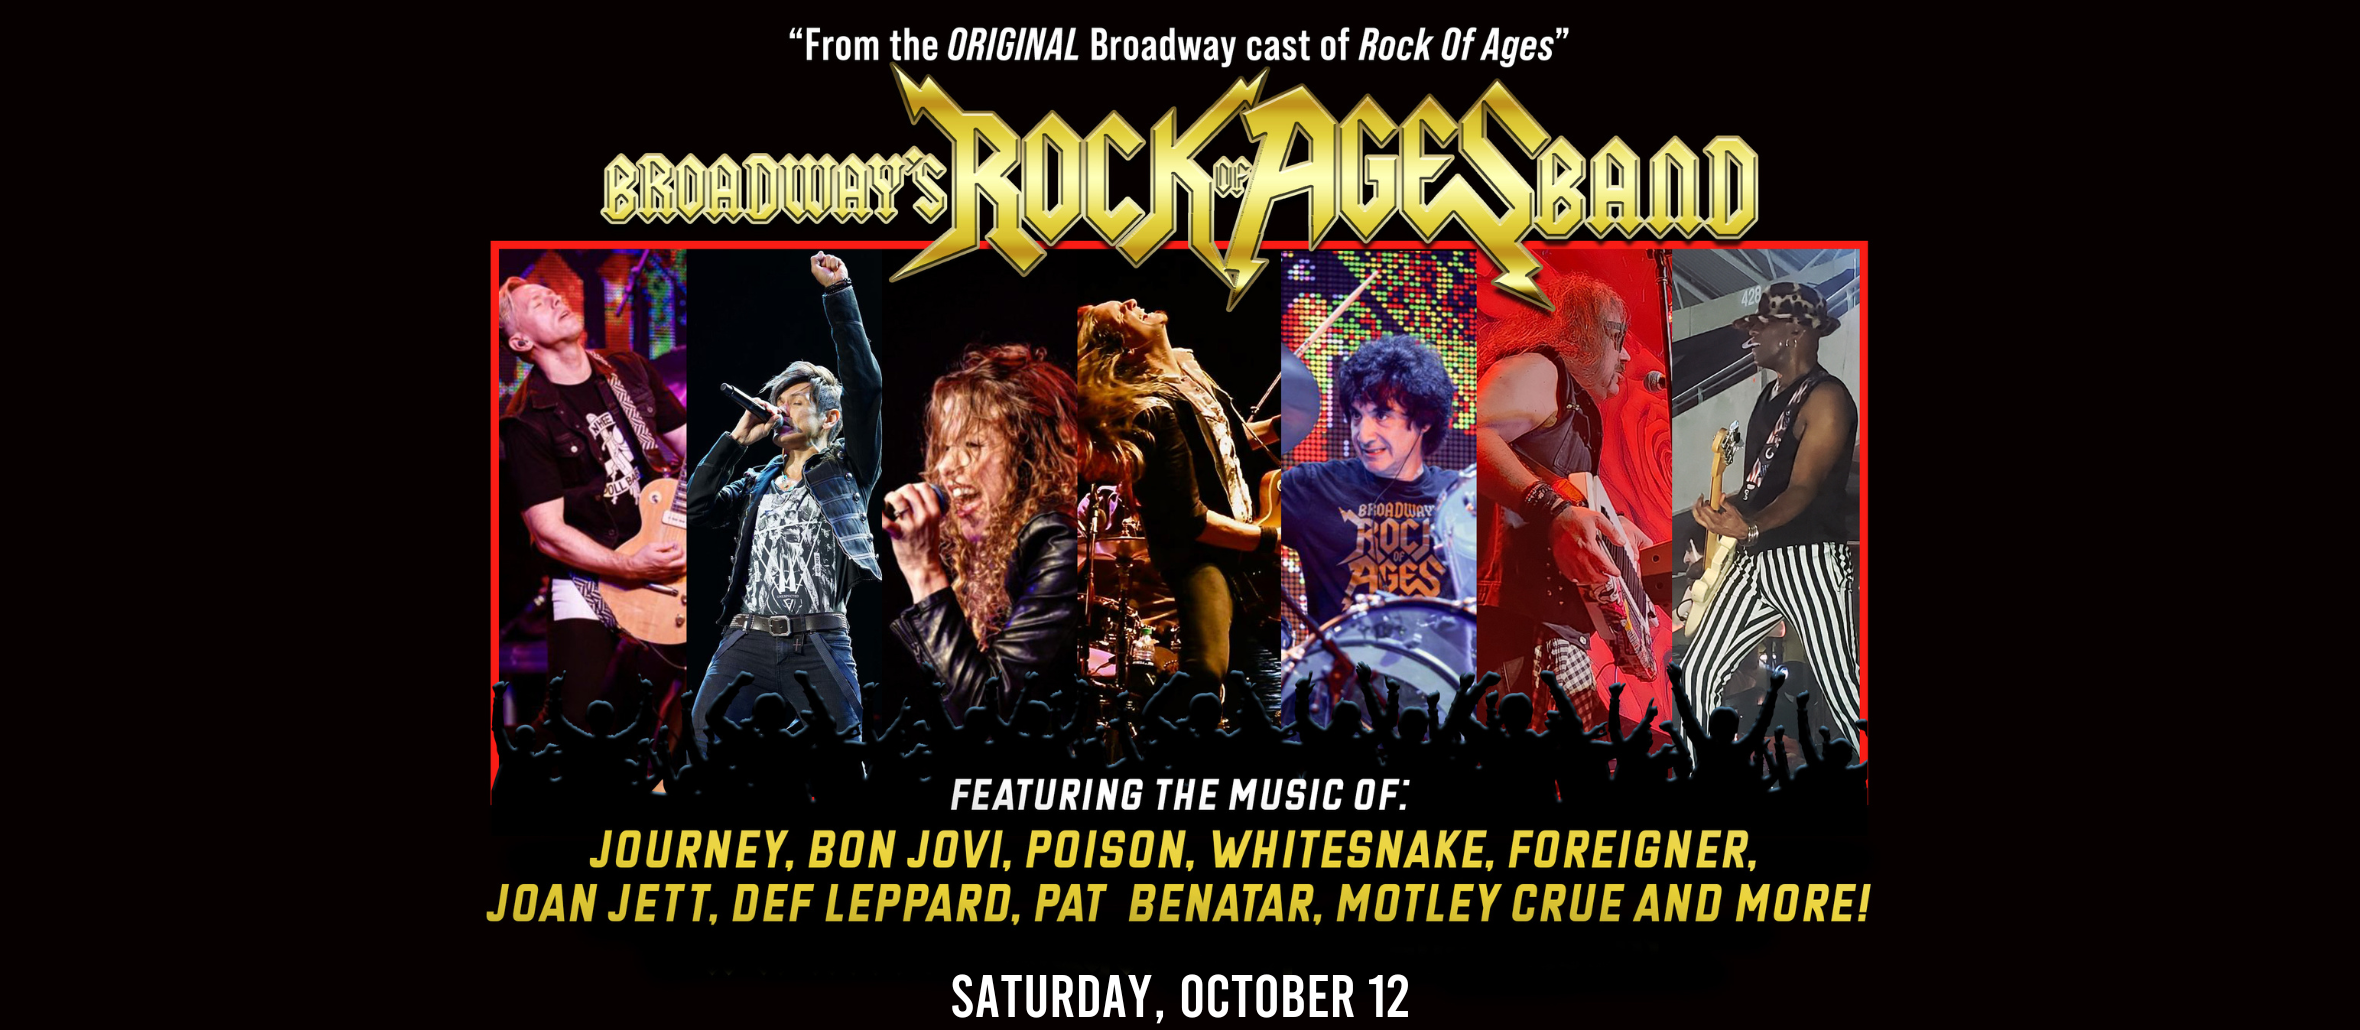 Broadway’s Rock of Ages Band